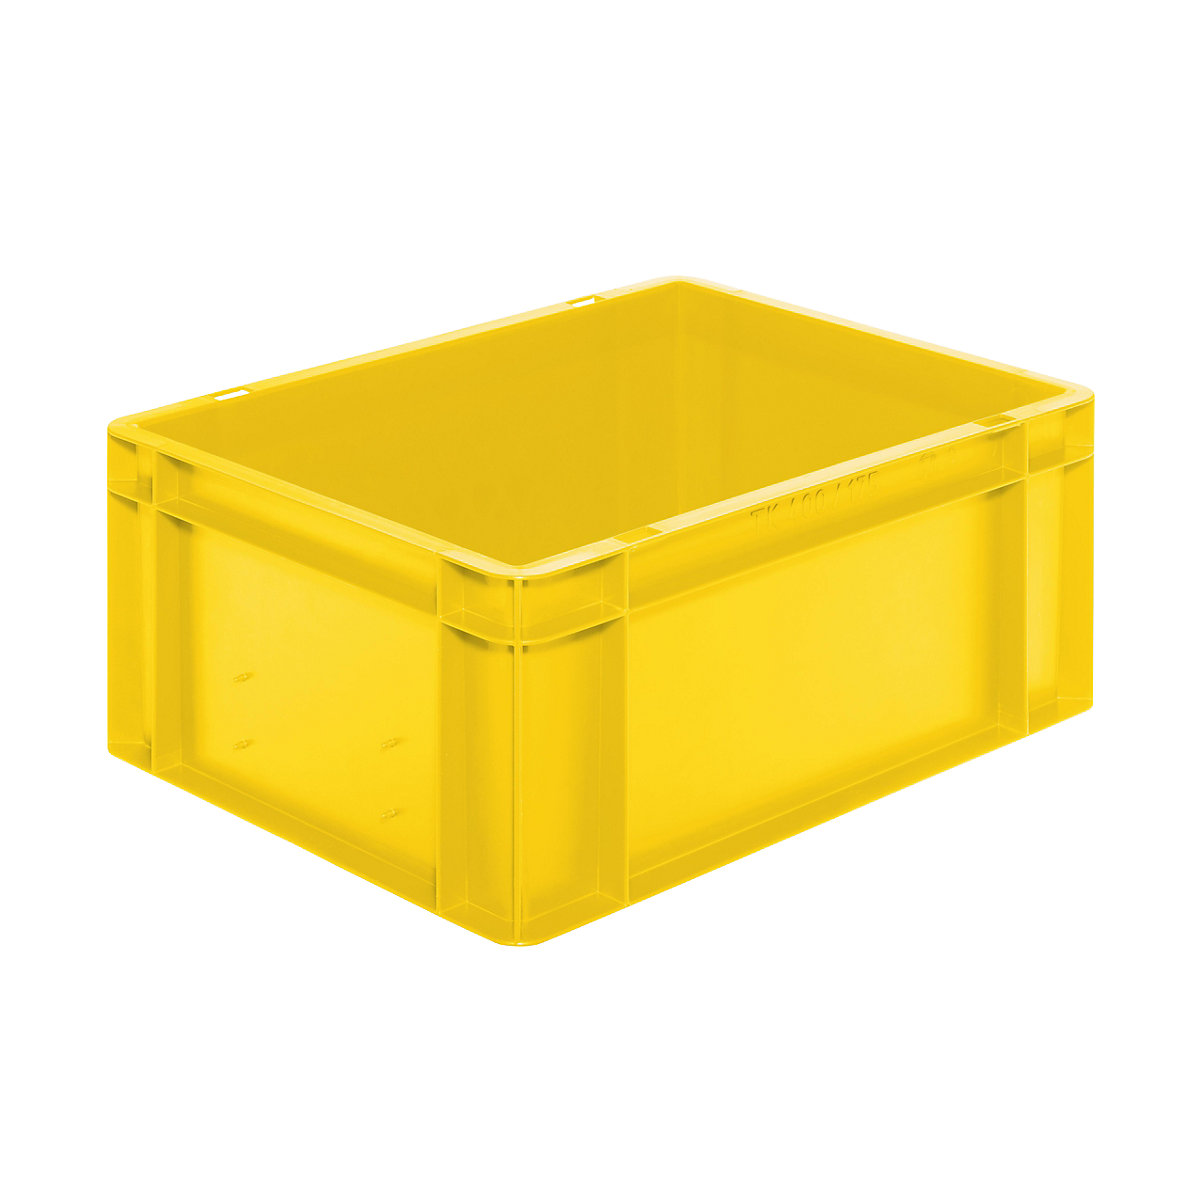 Euro stacking container, closed walls and base, LxWxH 400 x 300 x 175 mm, yellow, pack of 5